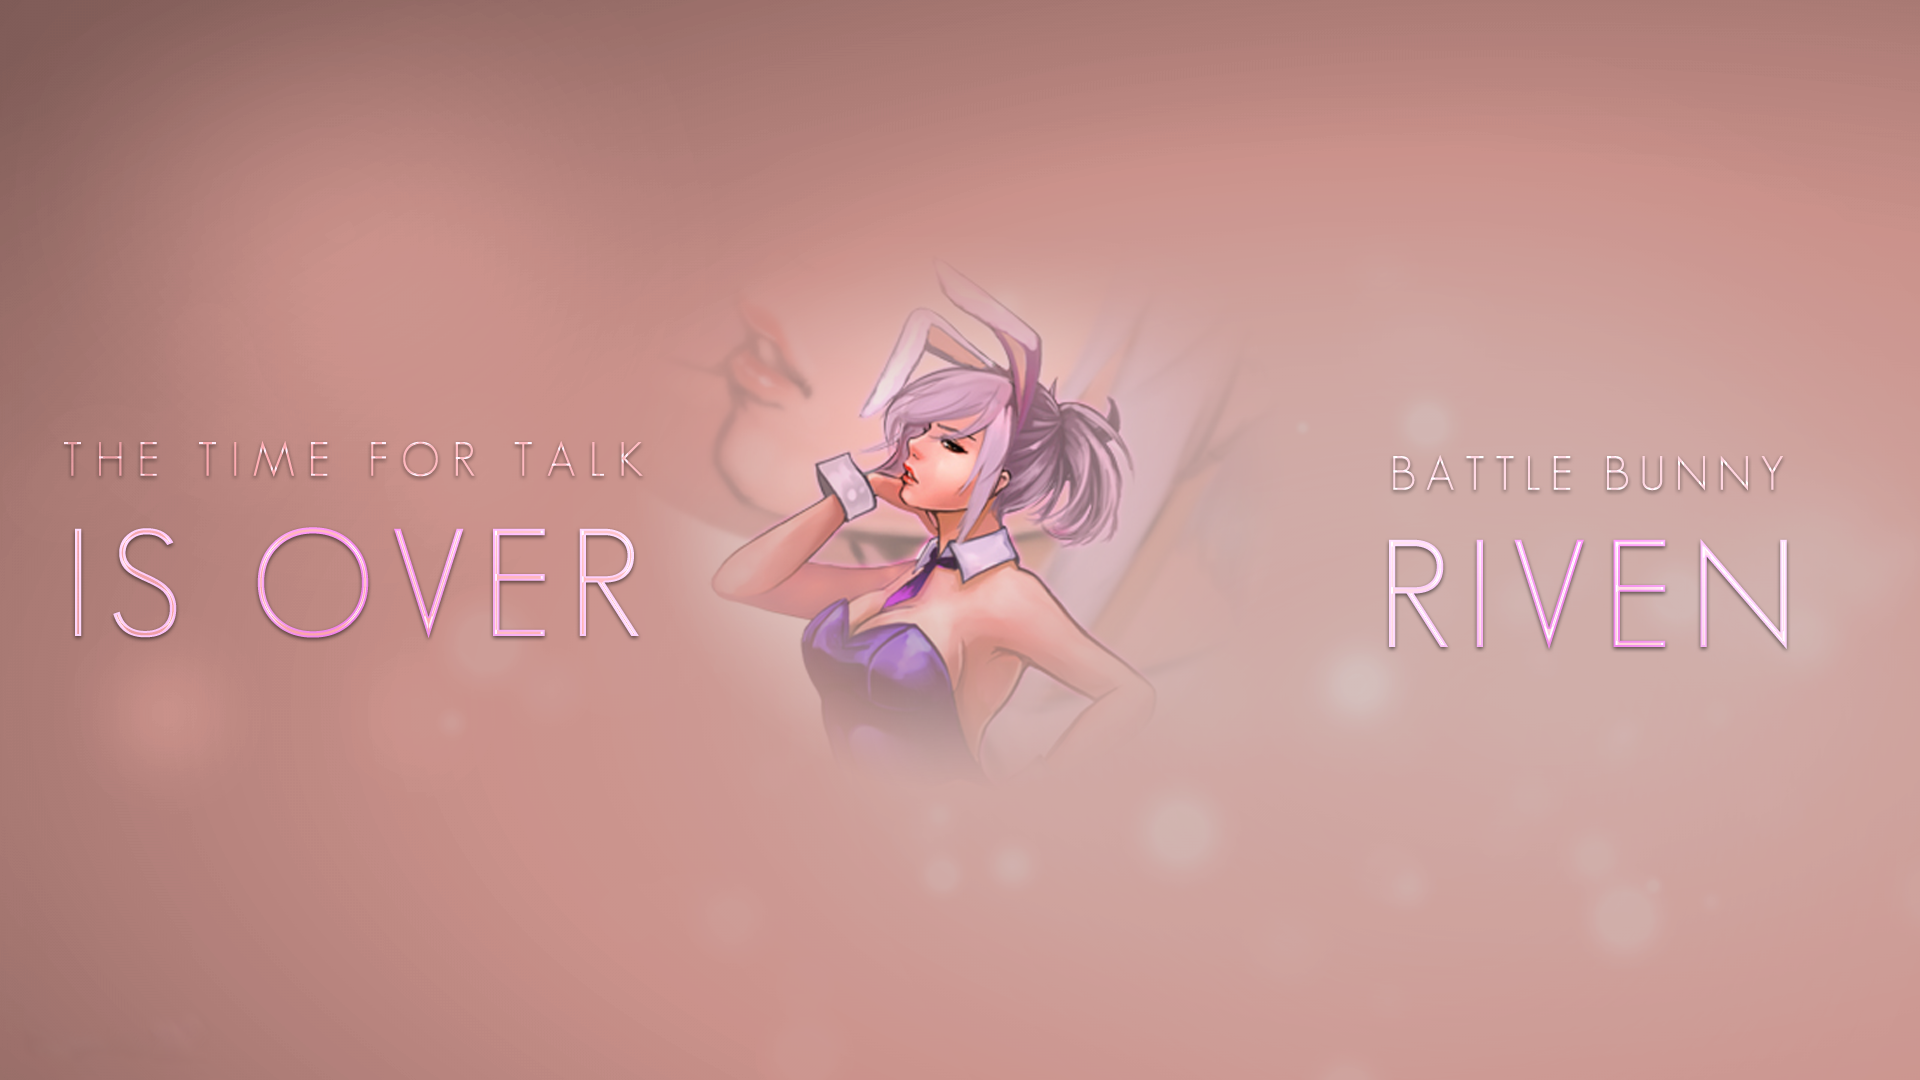 League Of Legends Riven Riven League Of Legends Simple Background Quote Bunny Girl Bunny Ears 1920x1080